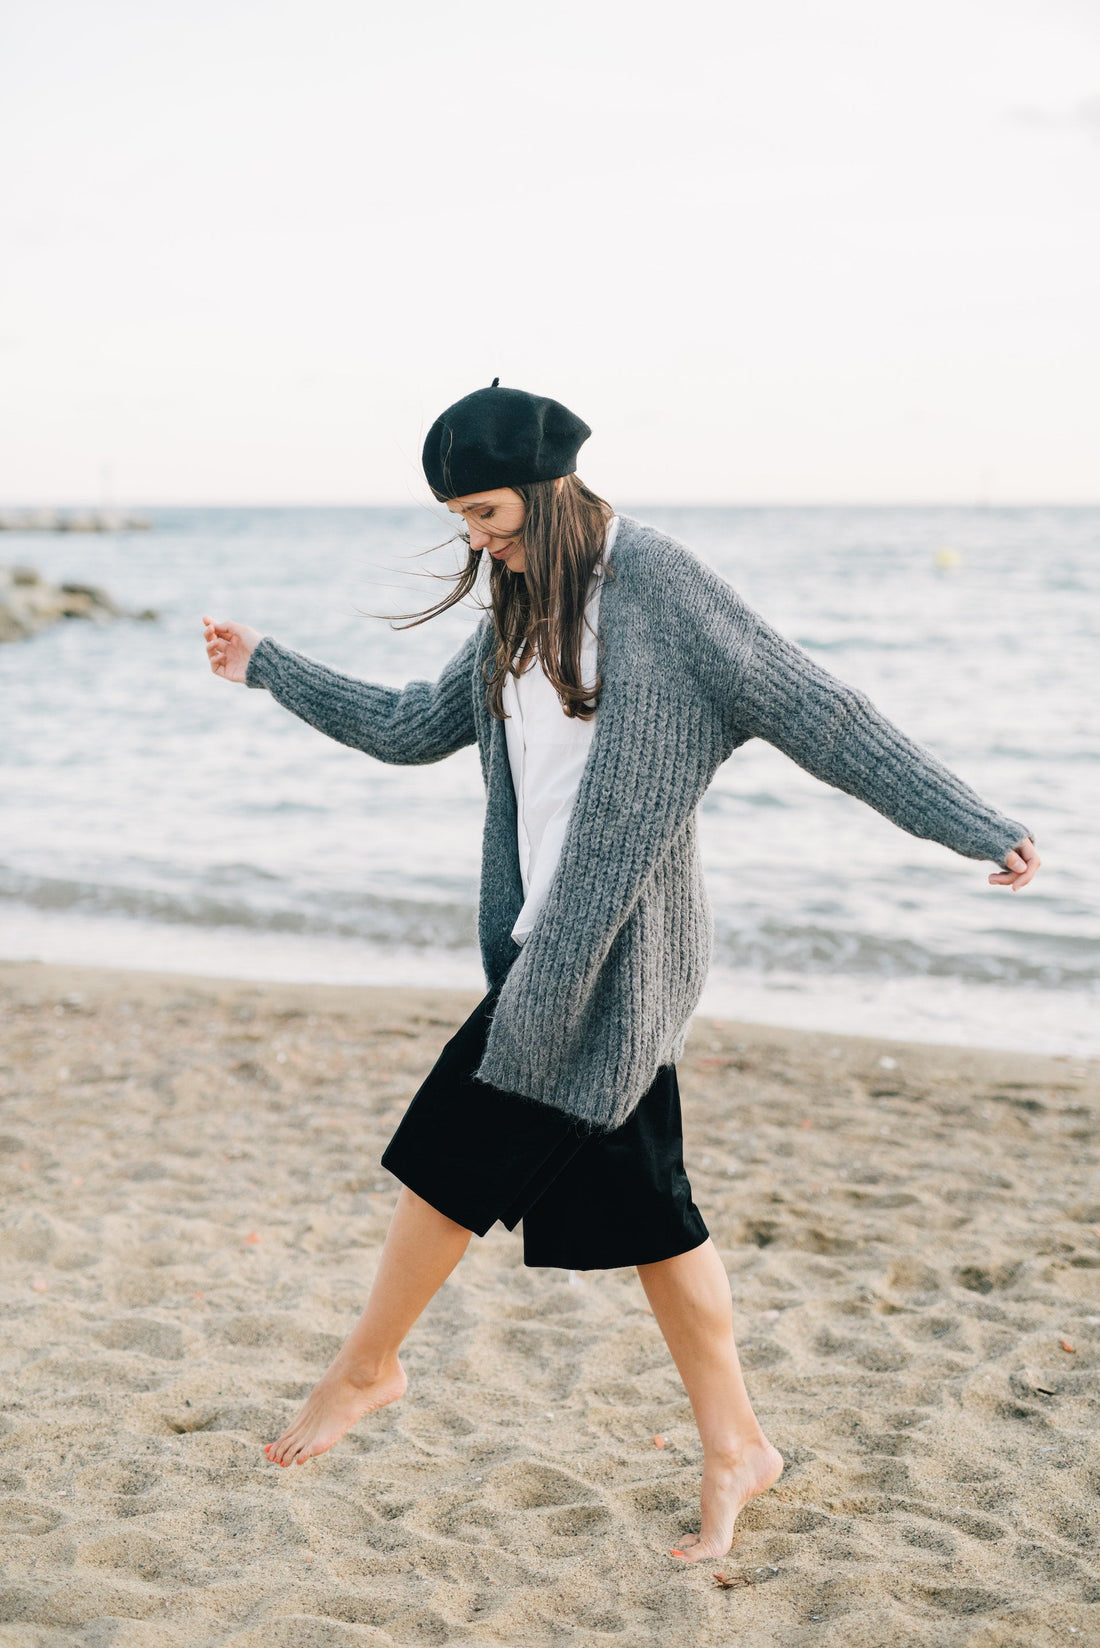 5 Stylish Ways to Wear Women's Knitted Cardigans - Linions